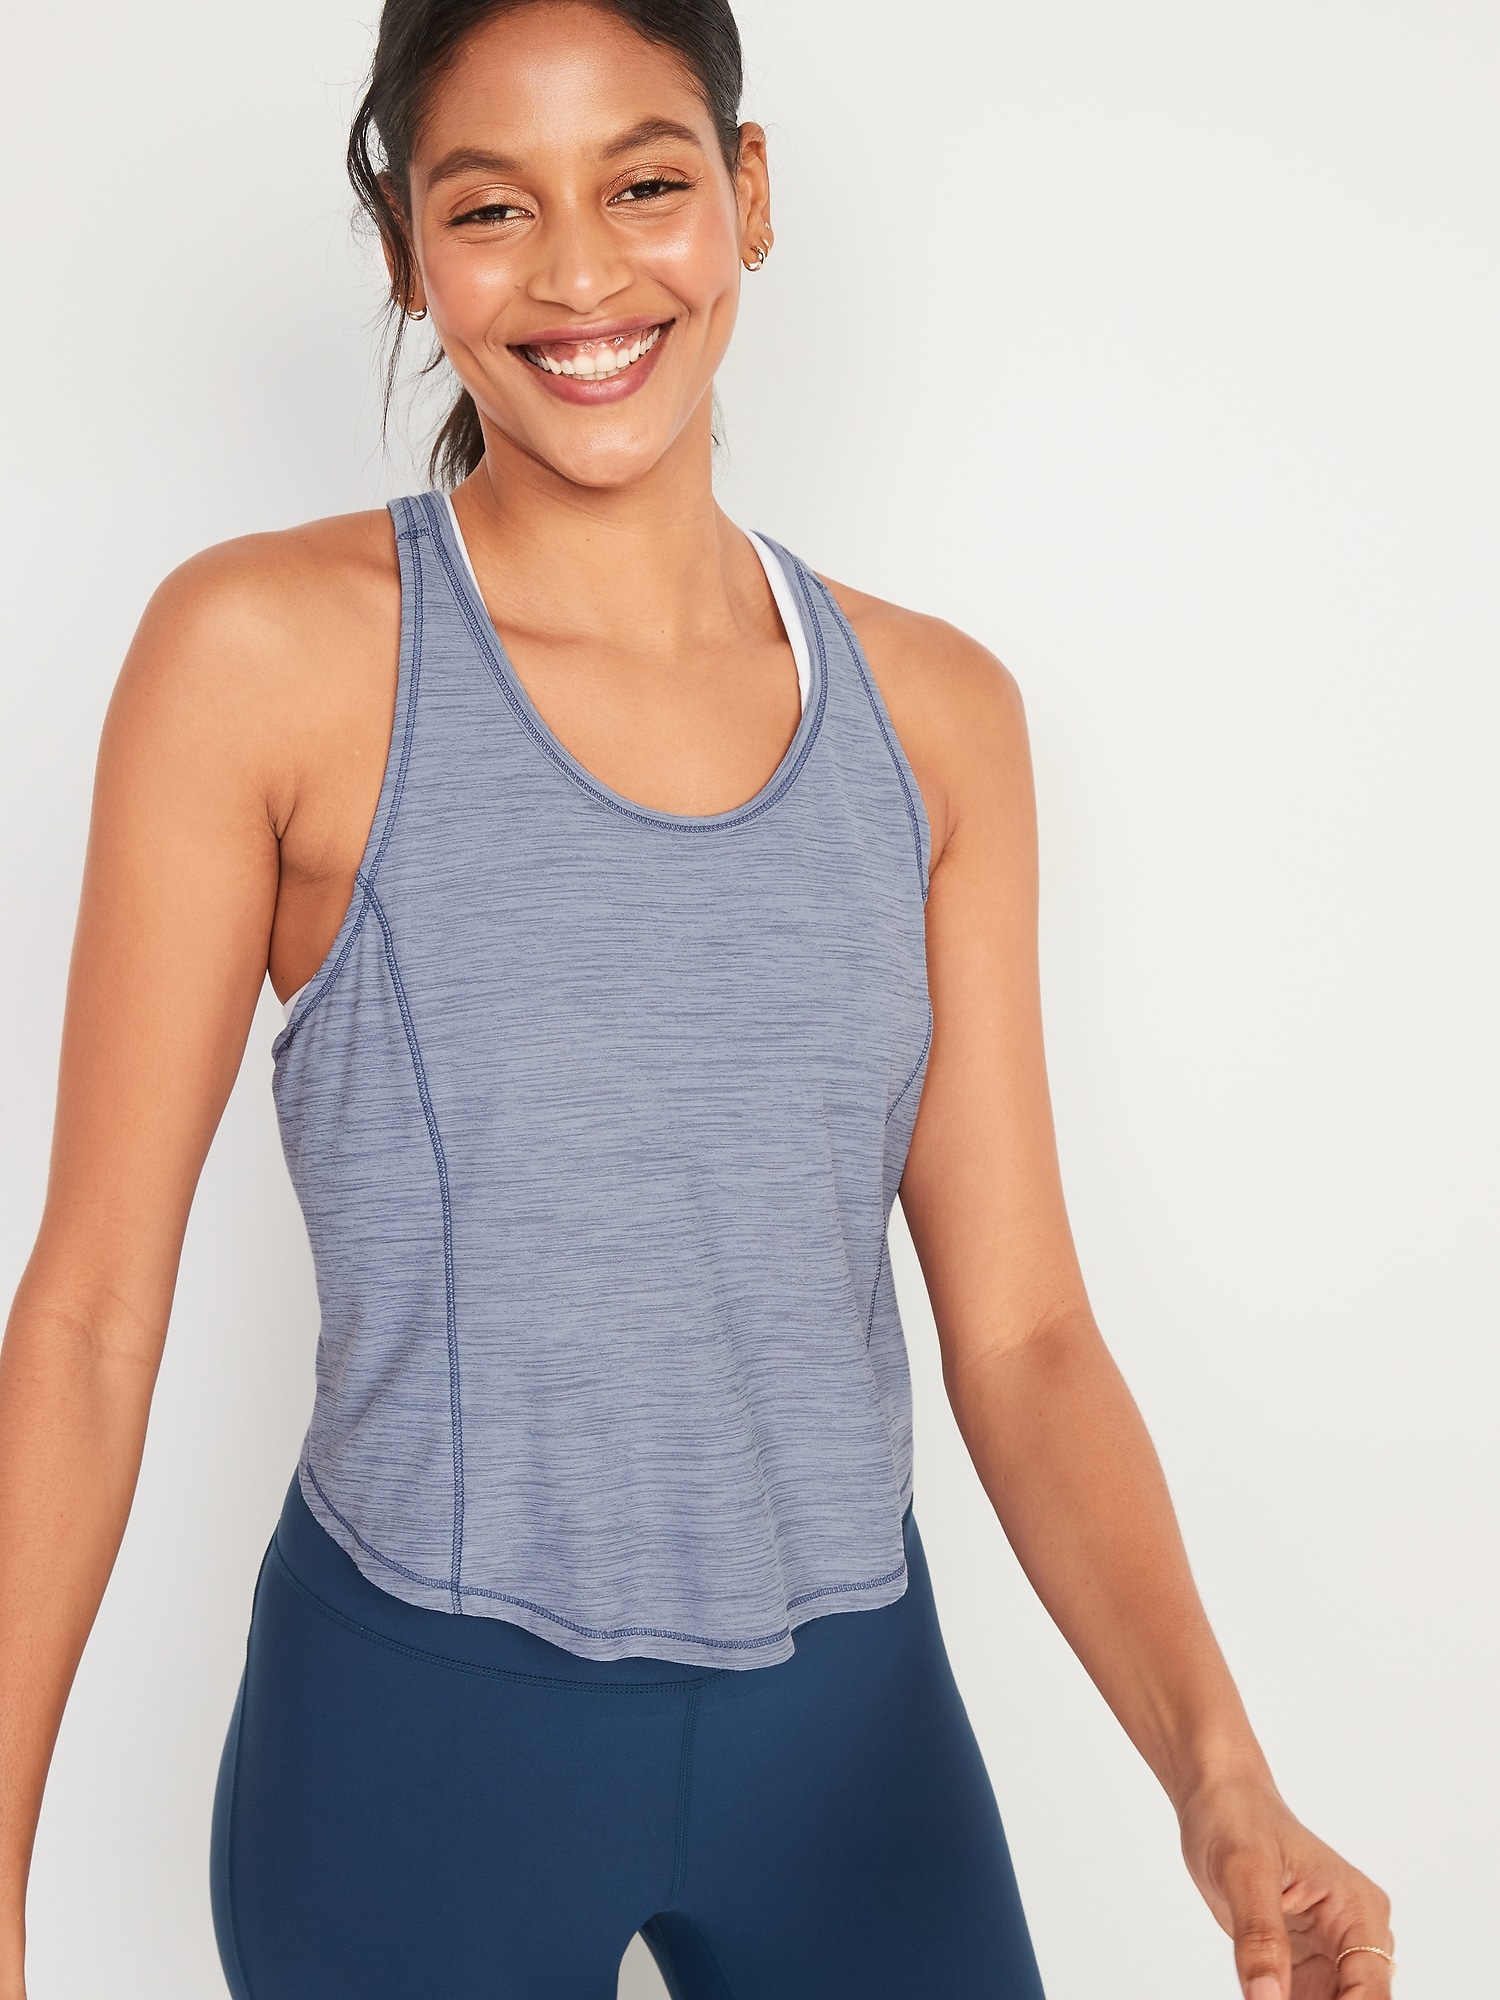 Old Navy Women's Powersoft Cropped Racerback Tank Top - White - Plus Size 4X